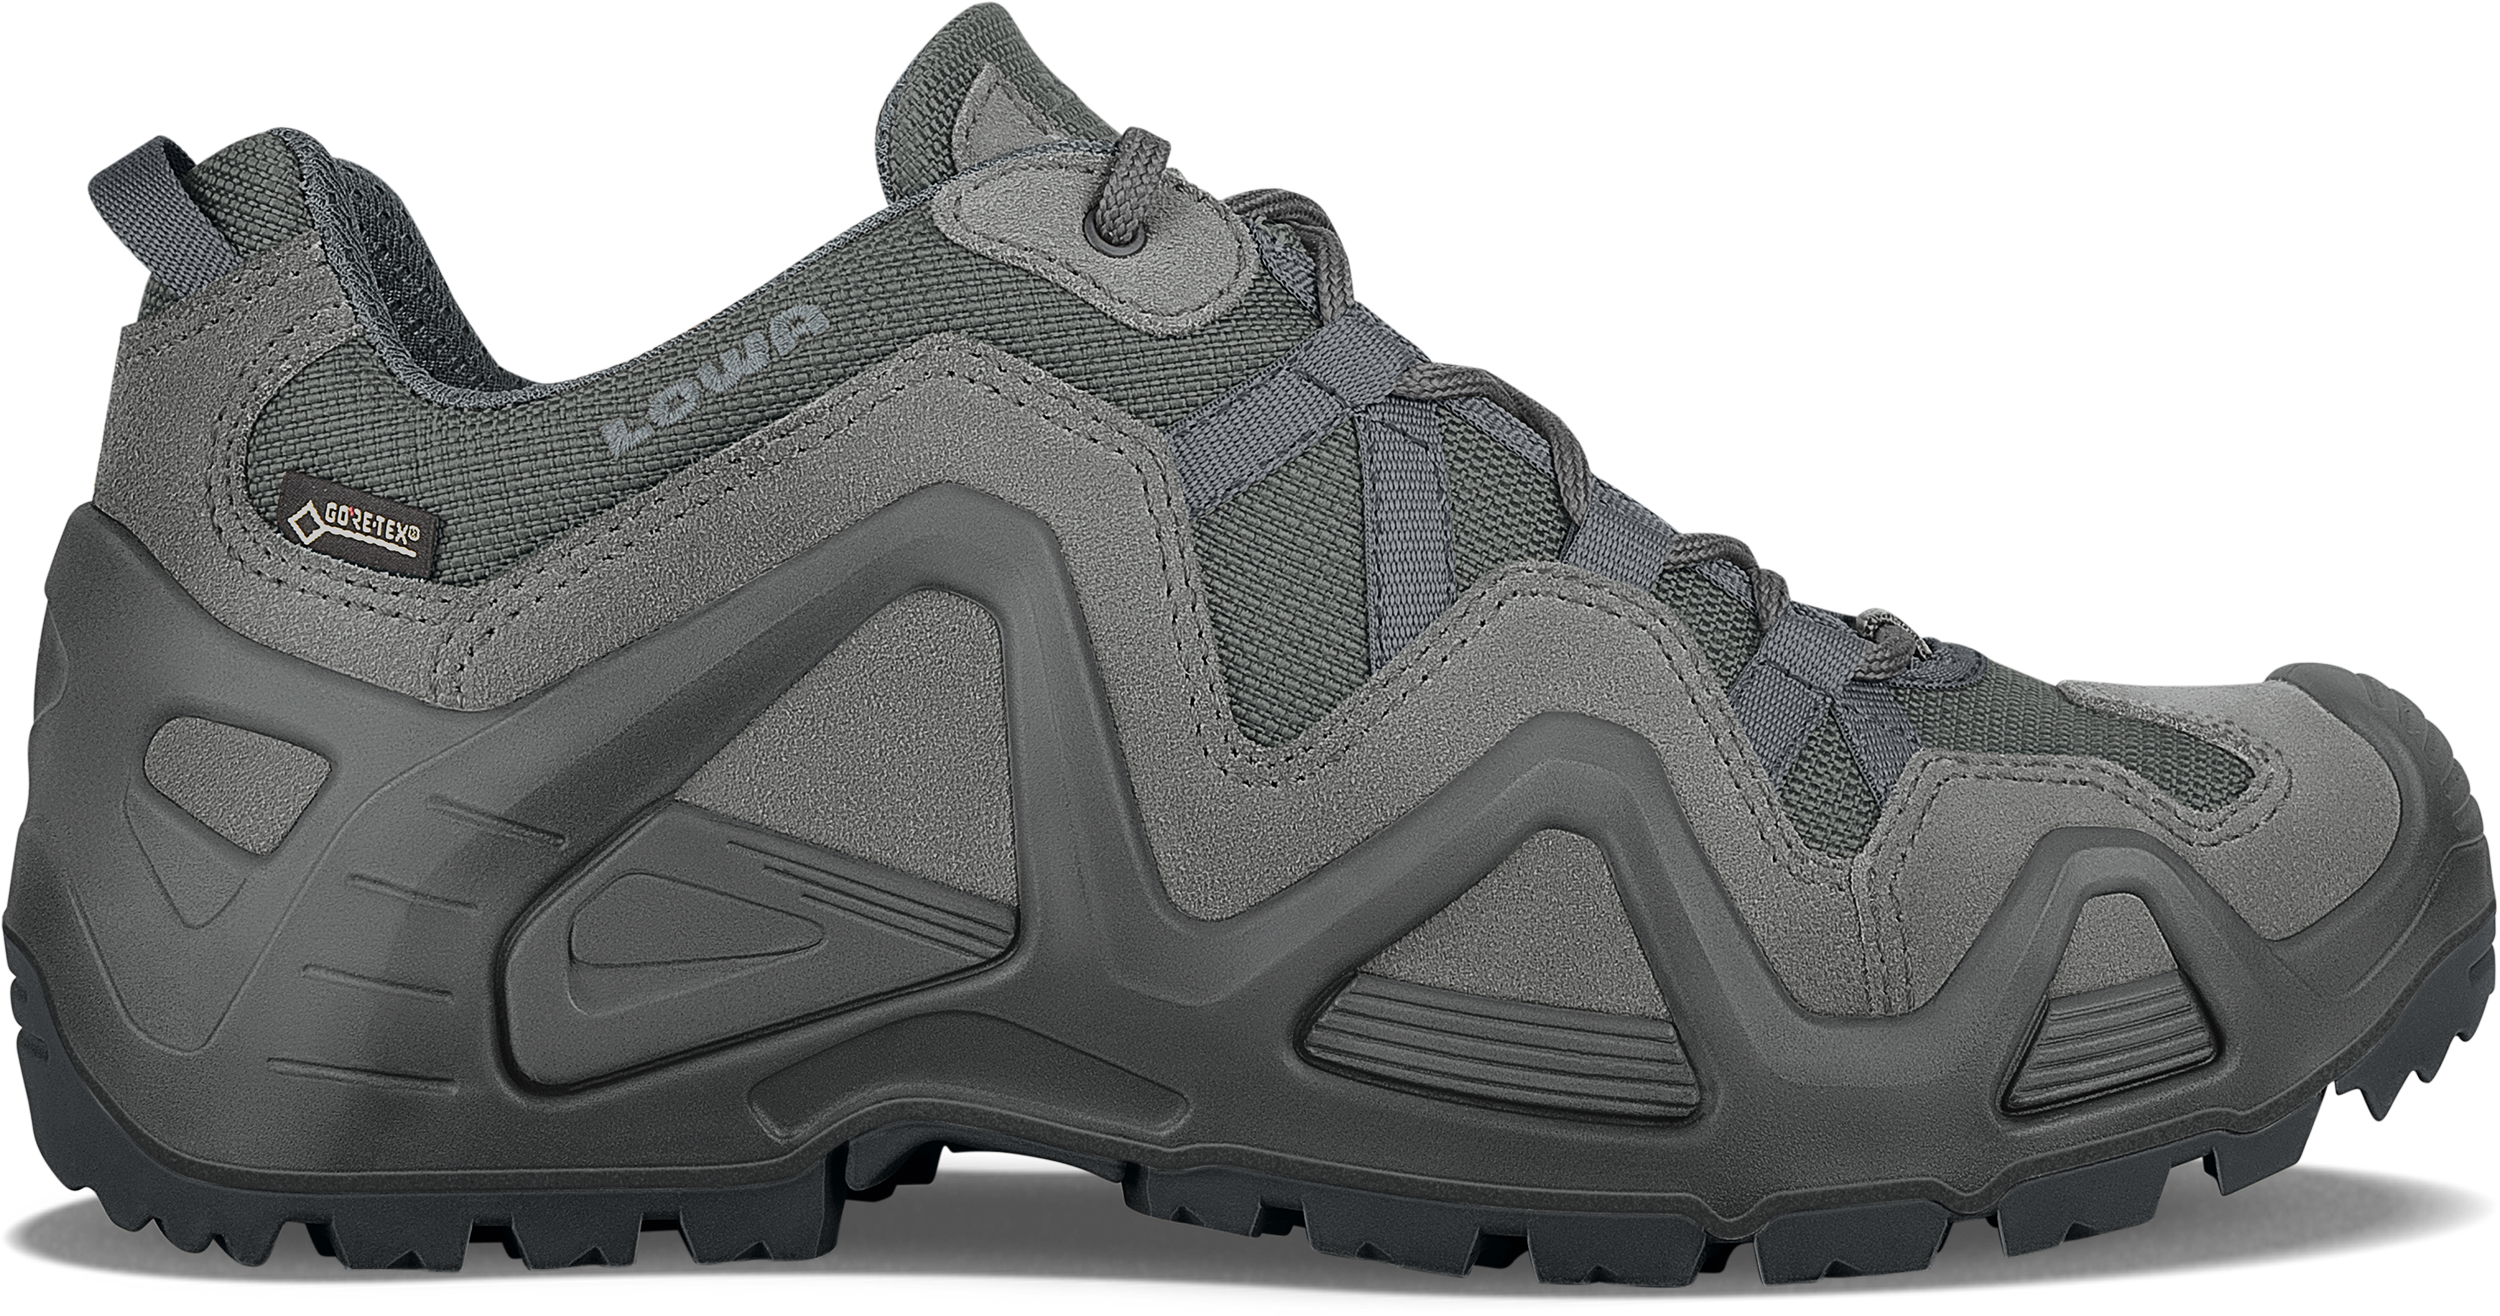 Taalkunde gewoon Peuter ZEPHYR GTX LO TF: TASK FORCE: CLOSE-QUARTERS COMBAT Shoes for Men | LOWA DK